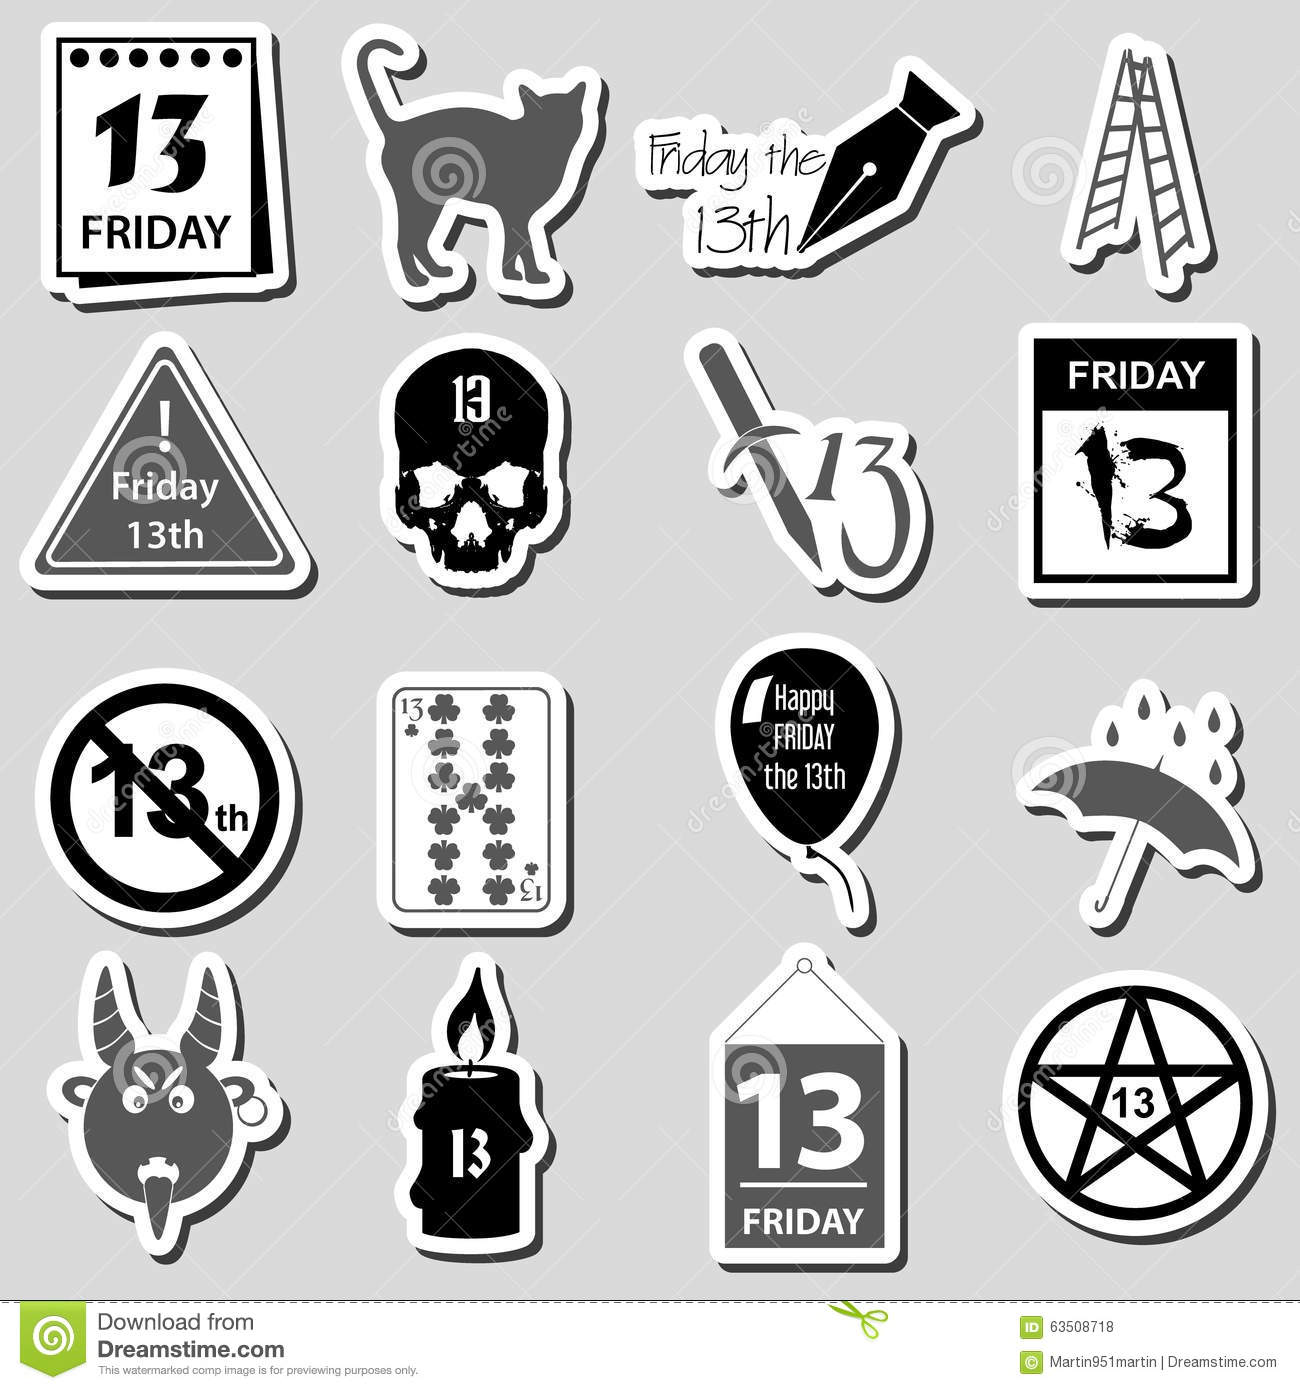 What are some bad luck symbols?